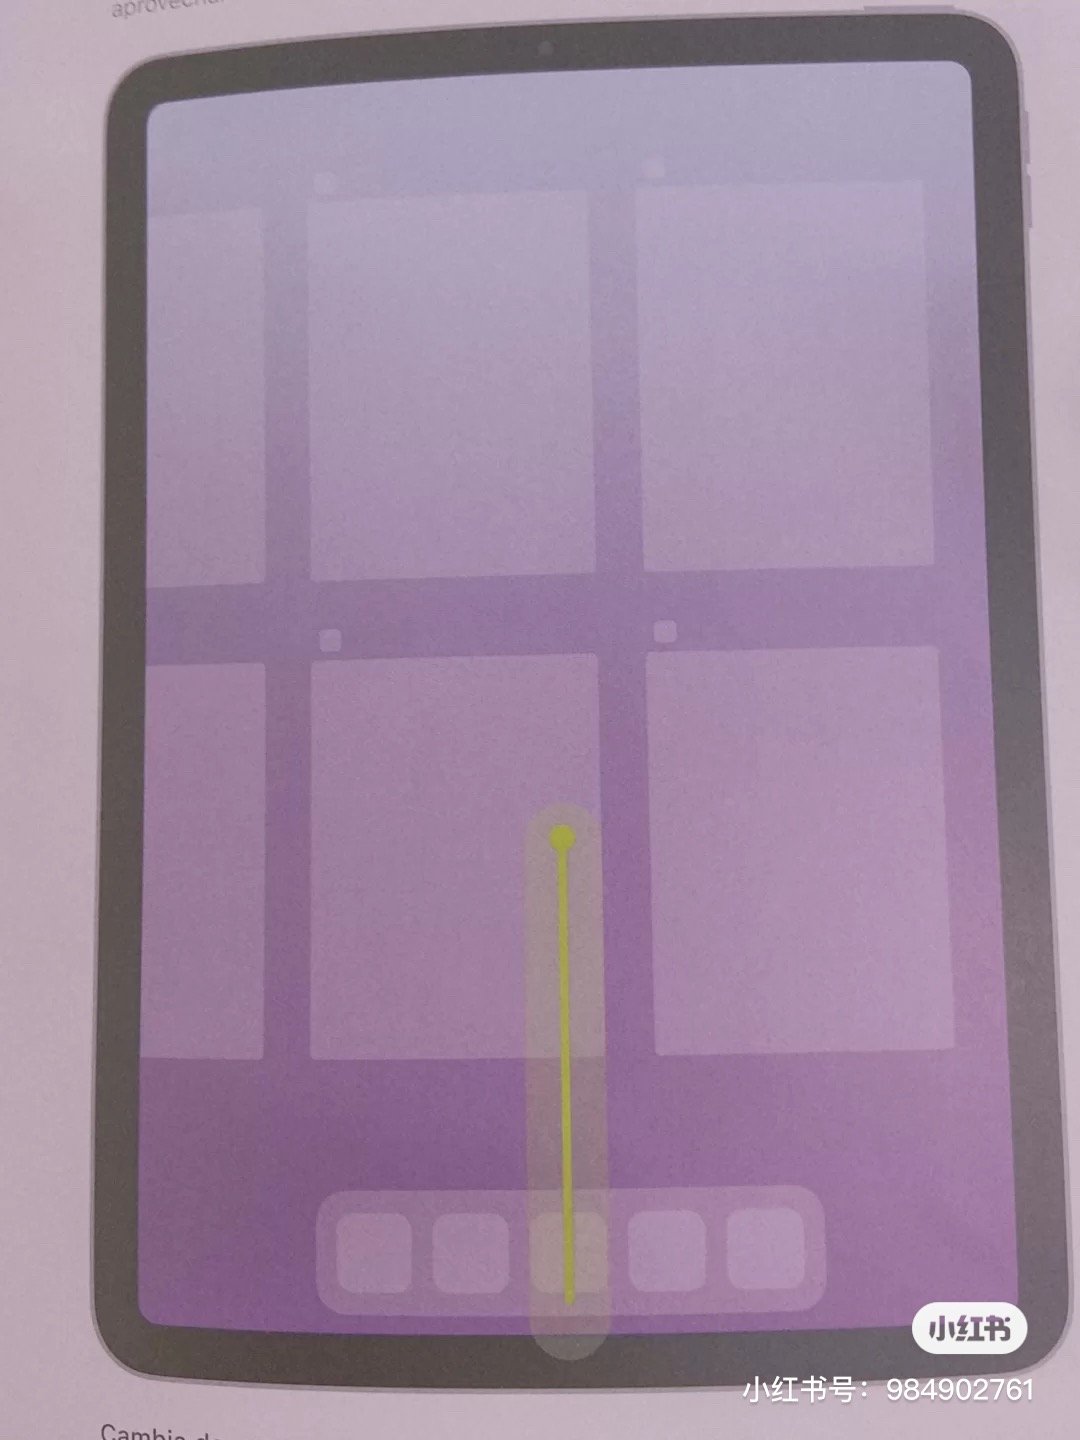 Alleged iPad Air 4 Manual Reveals Full-Screen Design, Touch ID Power Button, USB-C [Images]